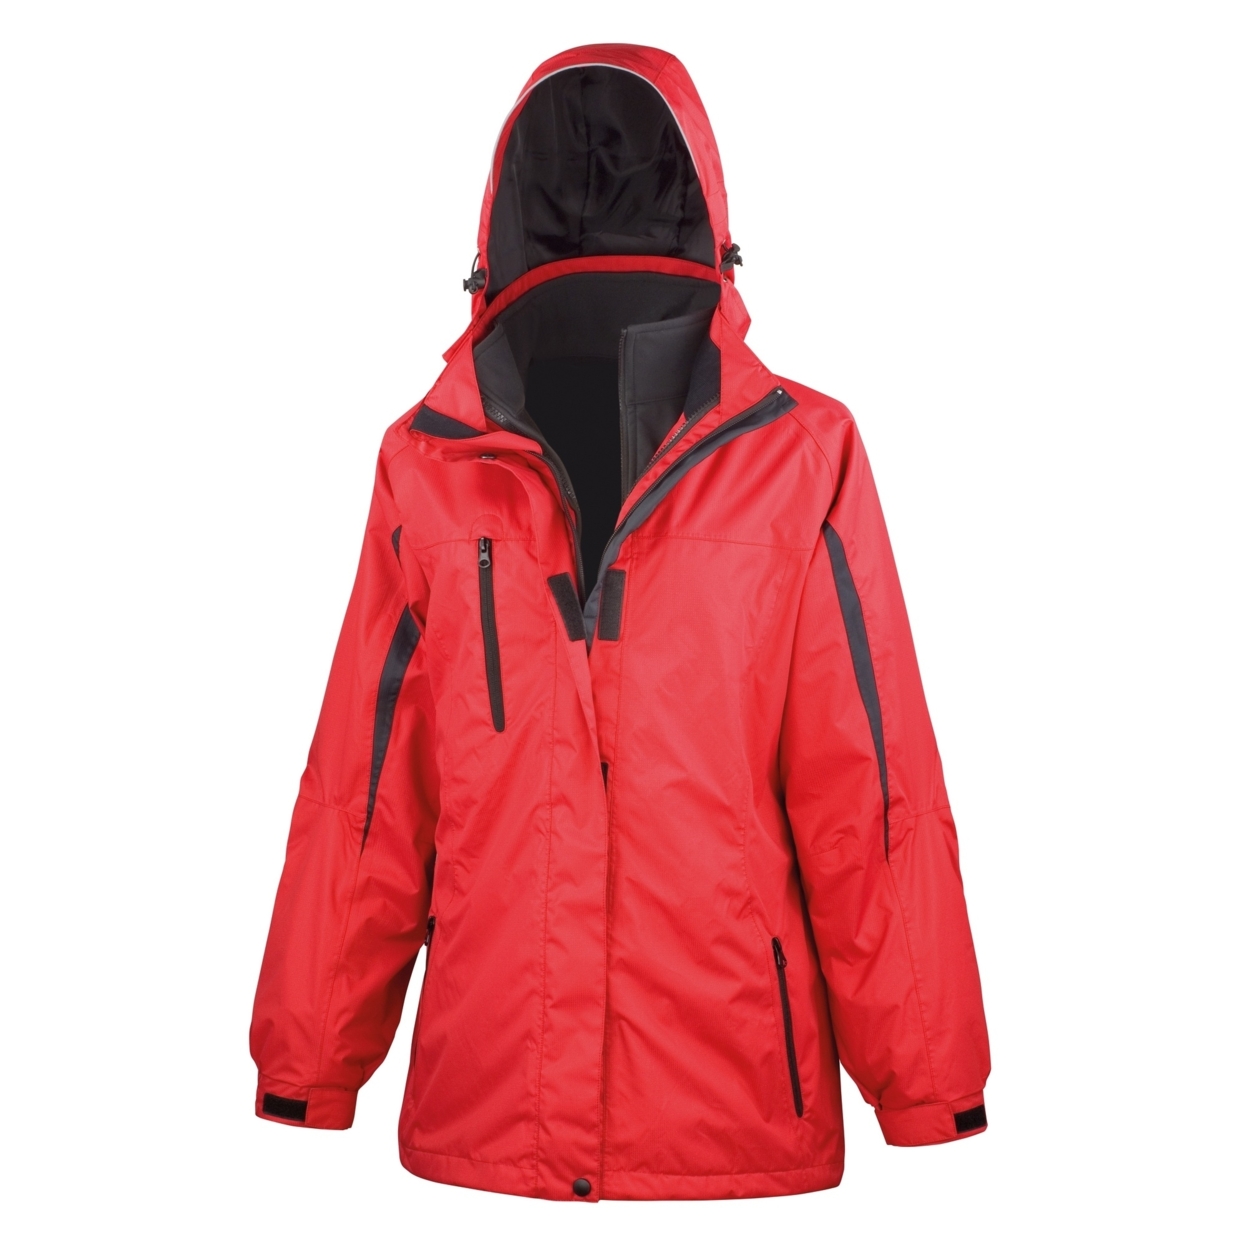 Result Womens 3 In 1 Softshell Journey Jacket With Hood - image 5 of 5